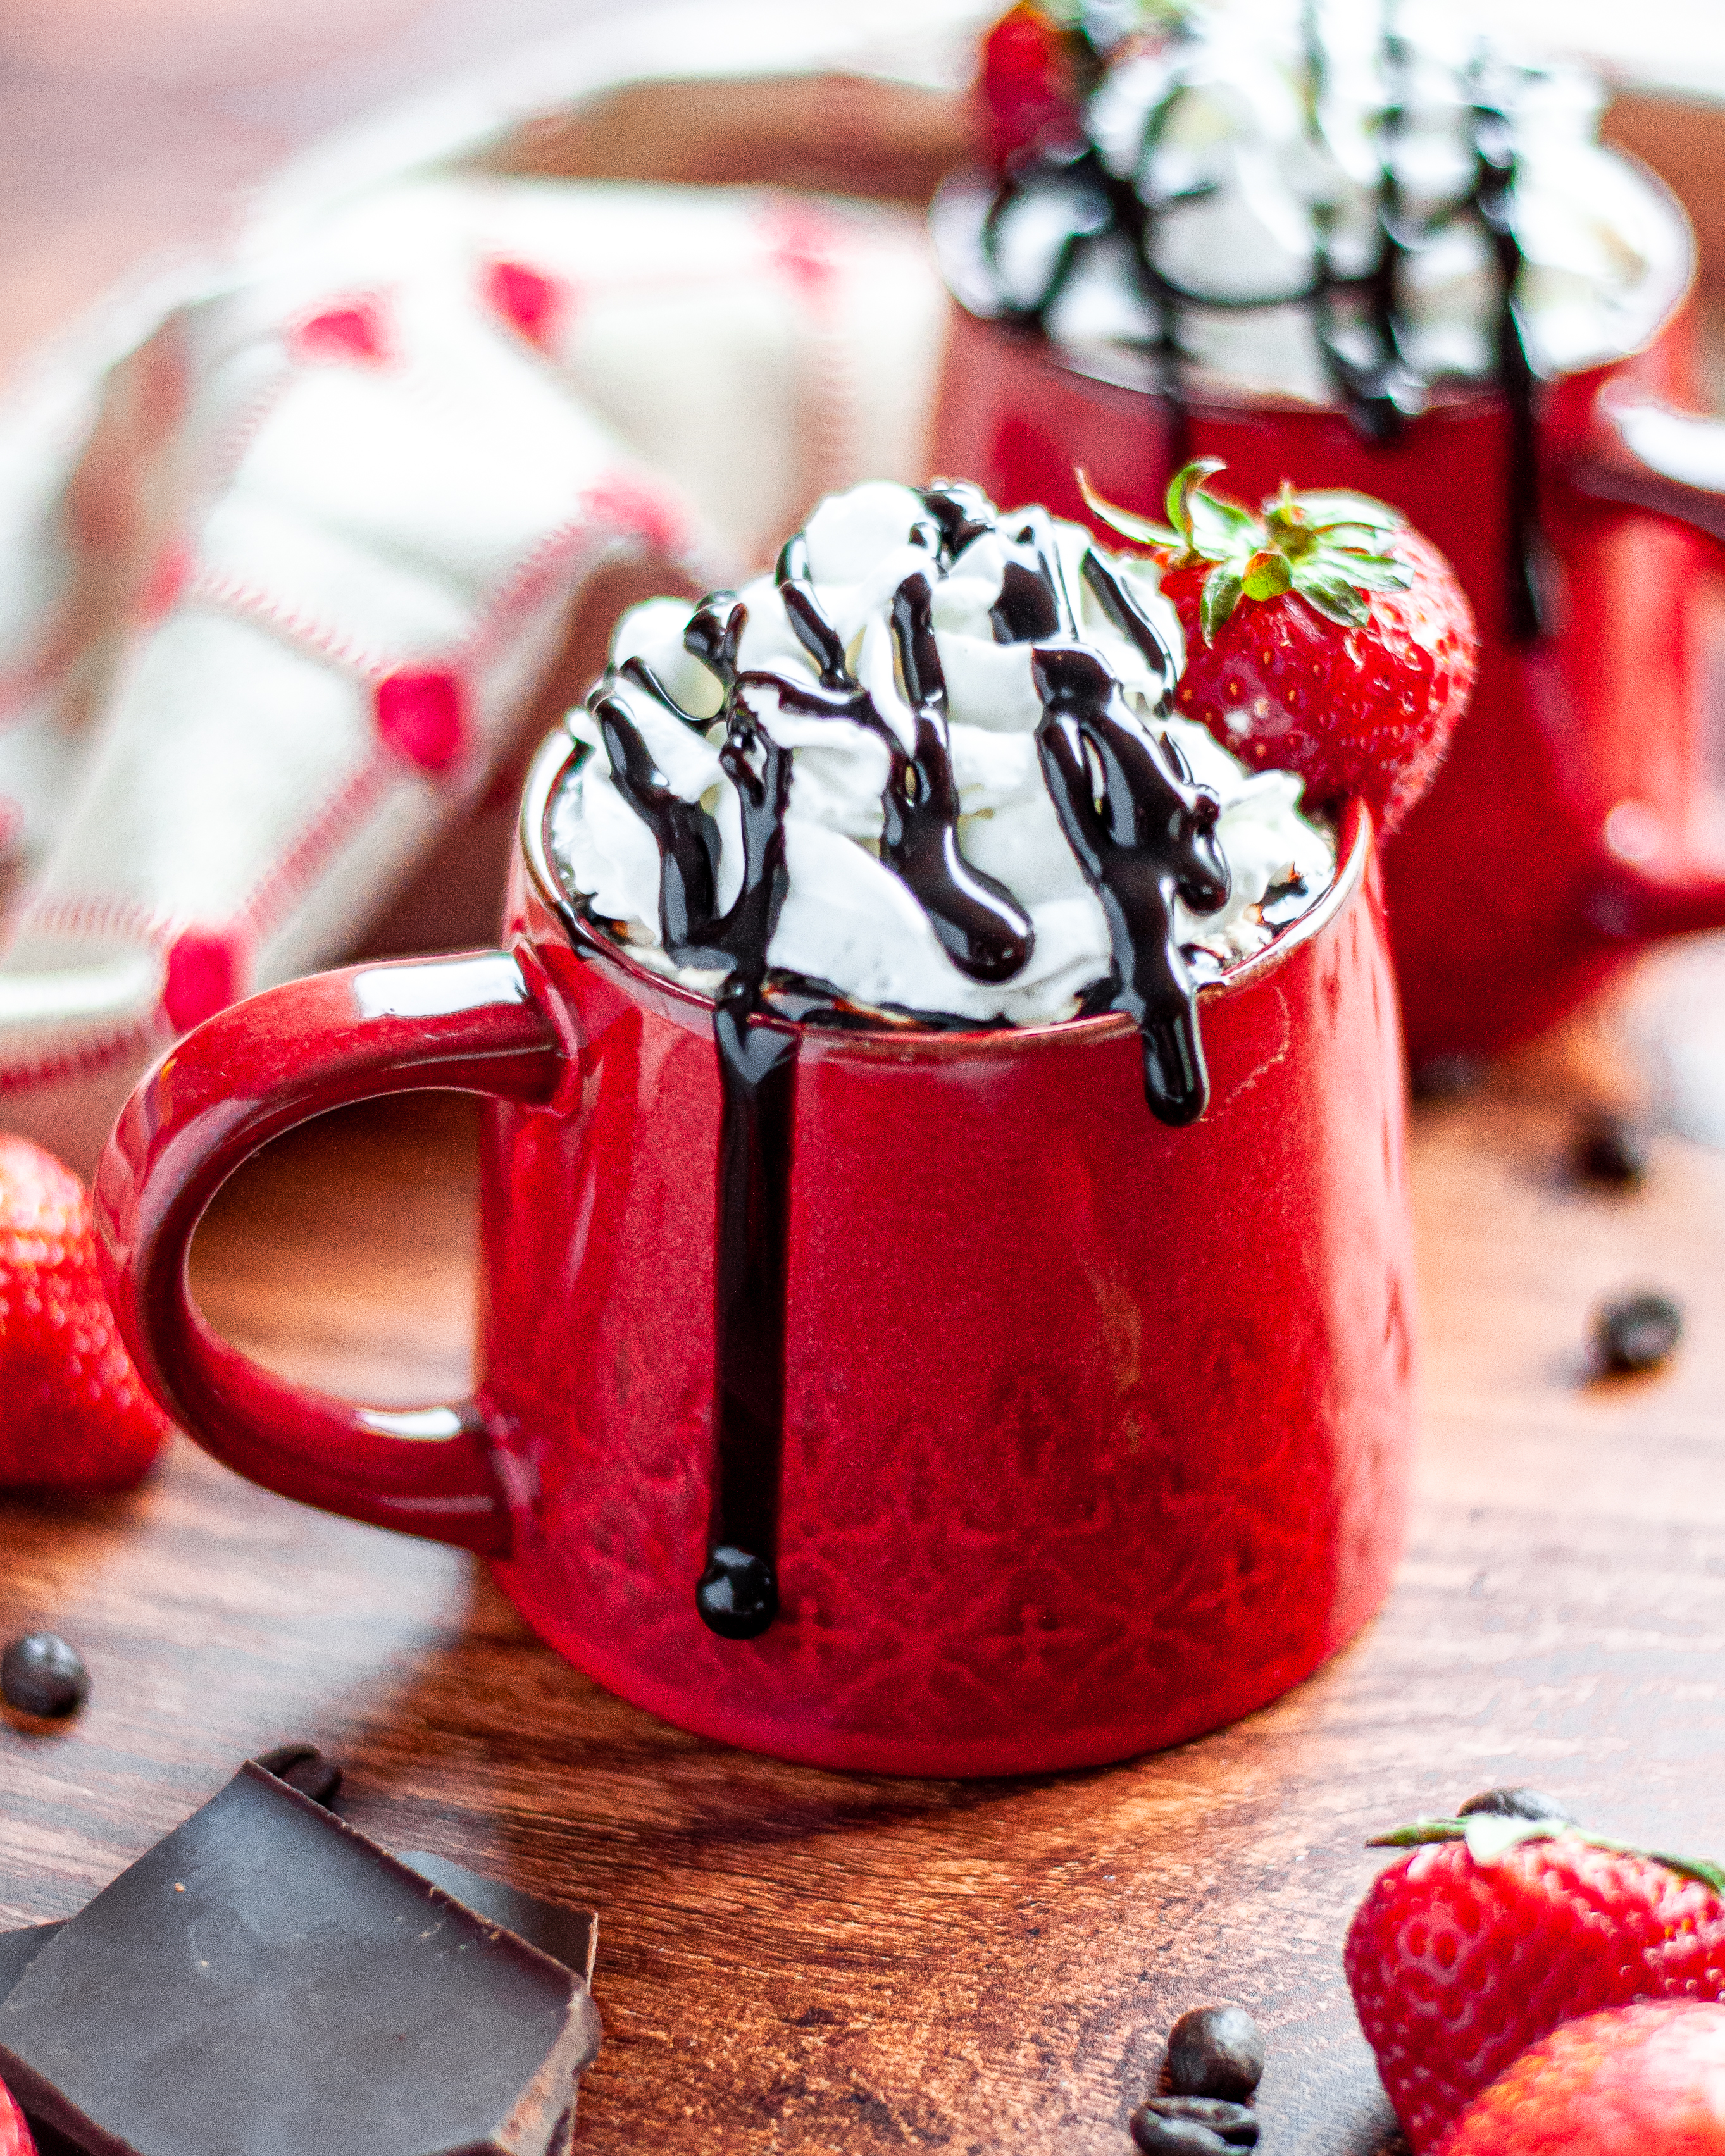 Close up of a red mug filled with a chocolate strawberry coffee and topped with whipped cream and dripping chocolate sauce. The mug is garnished with a fresh strawberry. The strawberry mocha is surrounded by pieces of chocolate, coffee beans, fresh strawberries, and tan and red linen, with another mug in the background.